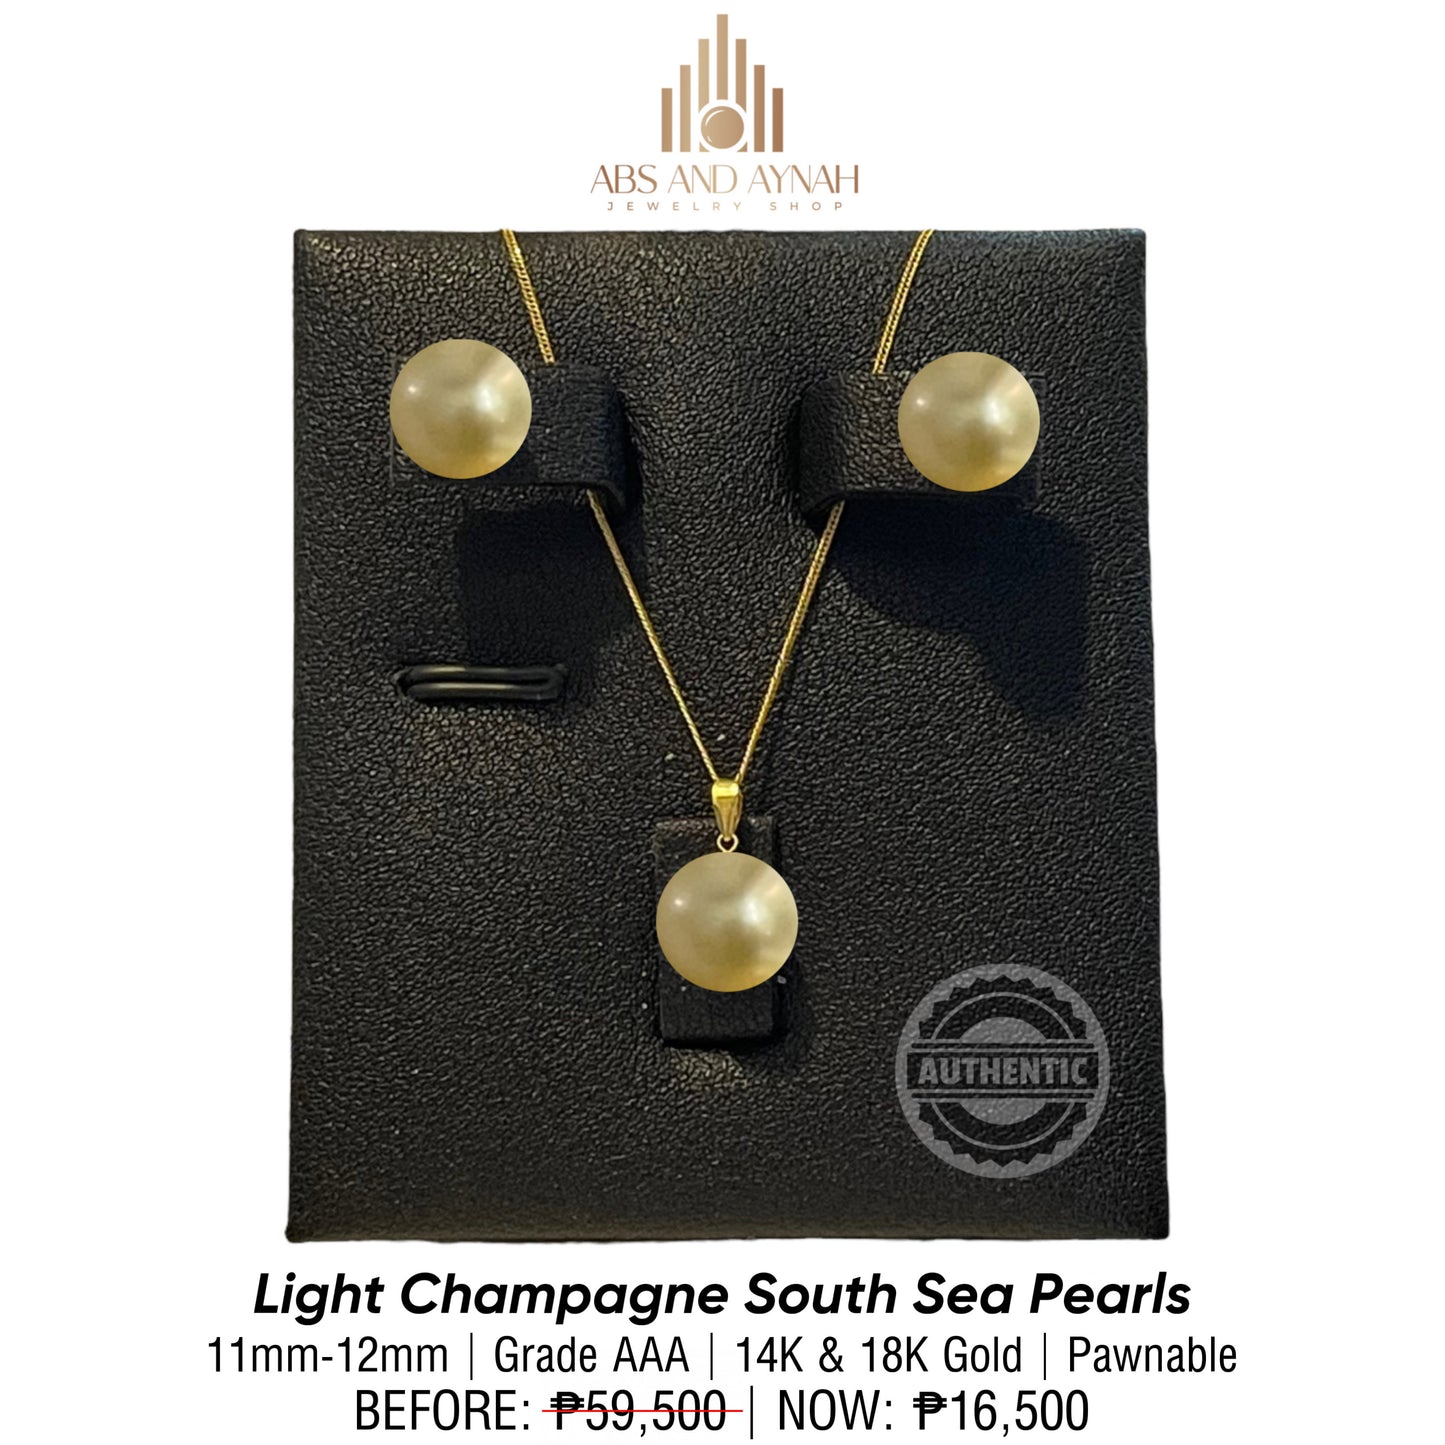 Light Champagne South Sea Pearls 11mm-12mm in 14K/18K Gold